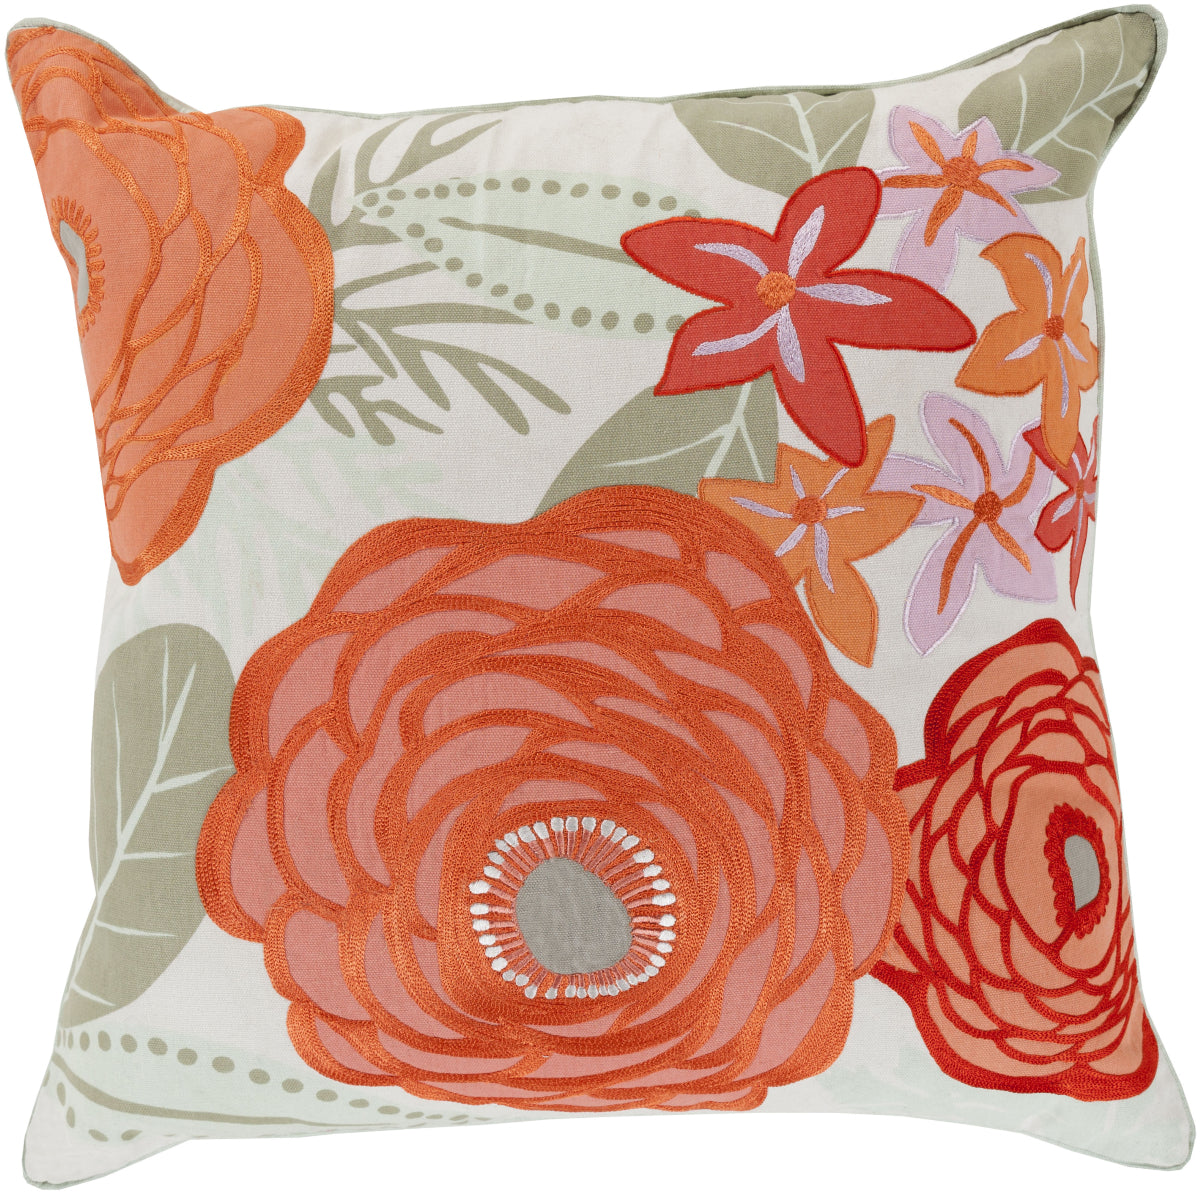 Surya Buttercup Flawlessly Floral BTC-002 Pillow by Kate Spain main image